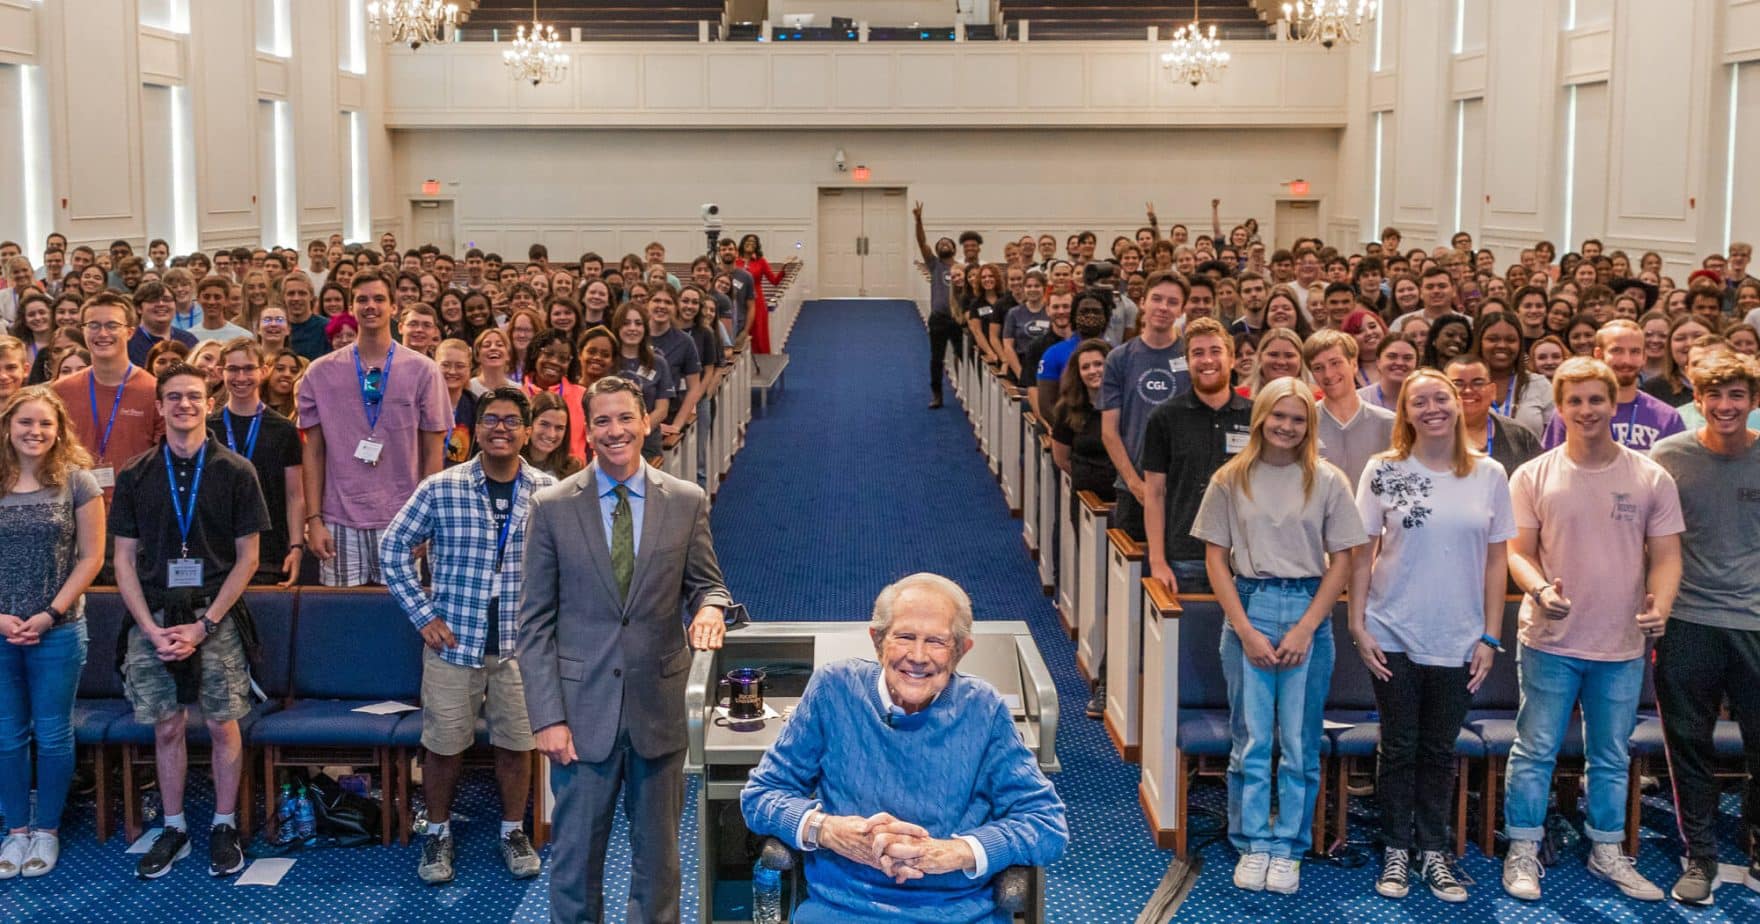 Dr. M.G. “Pat” Robertson with the freshman class at the College of Arts & Sciences’ Chancellor’s Forum.